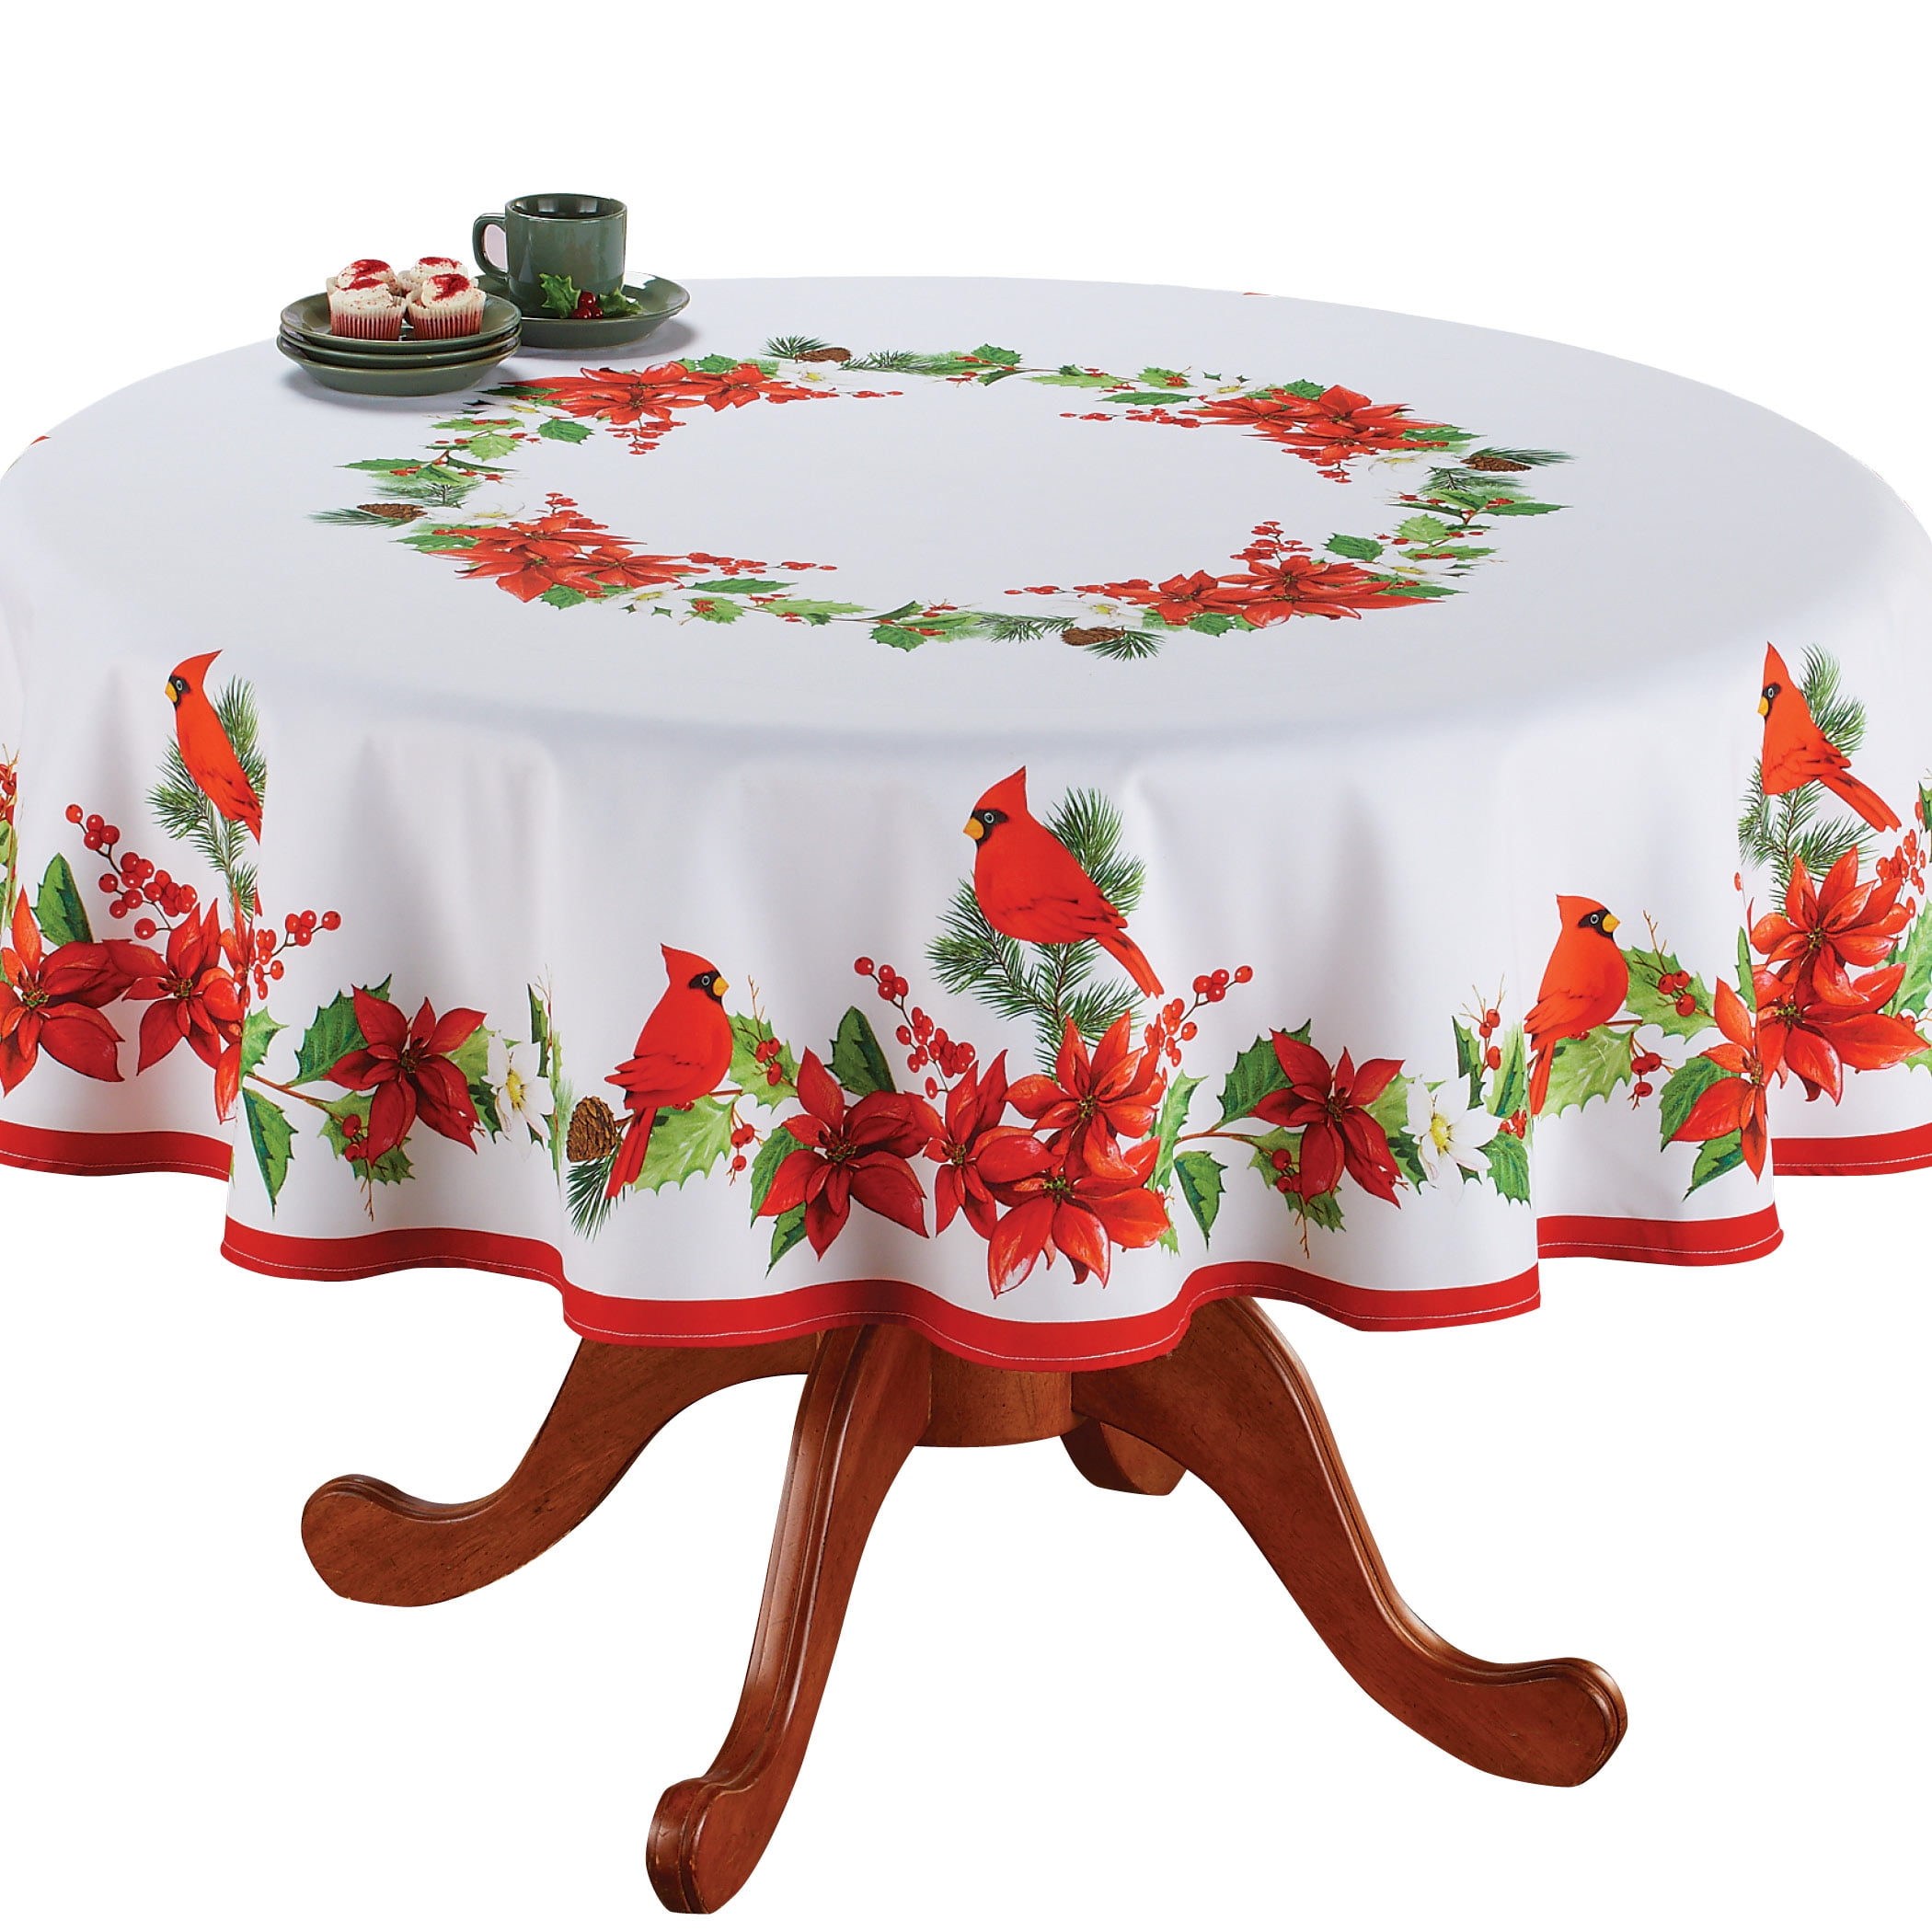 New 60 X 120 Oblong Red Bird Holiday Christmas fabric tablecloth cardinals 